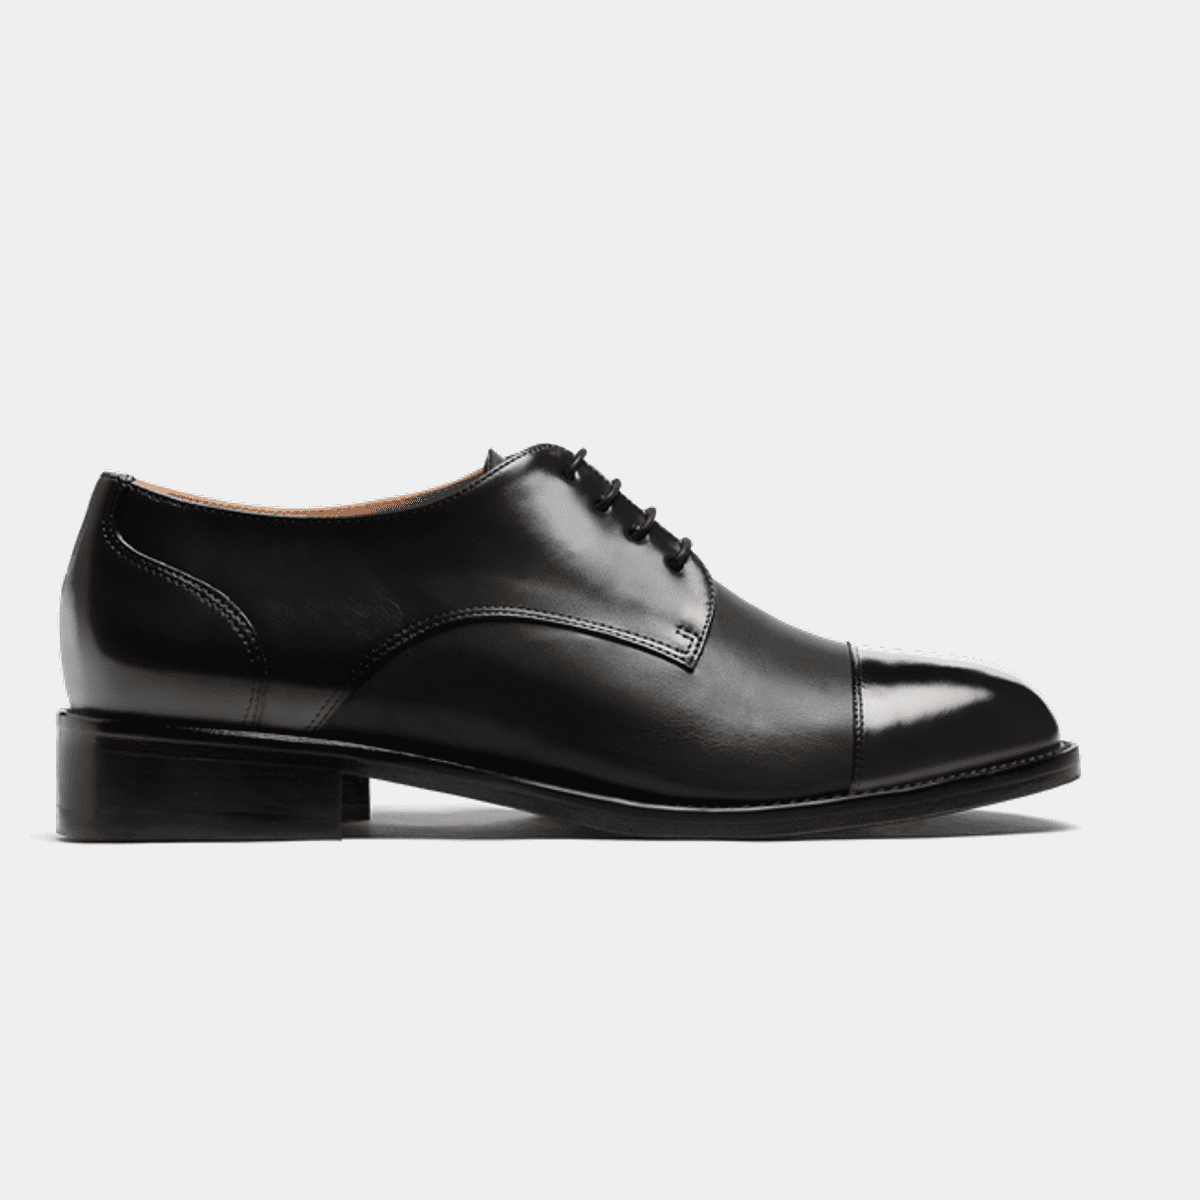 Cap toe Derby dress shoes - black flora leather & leather $214 | Sumissura